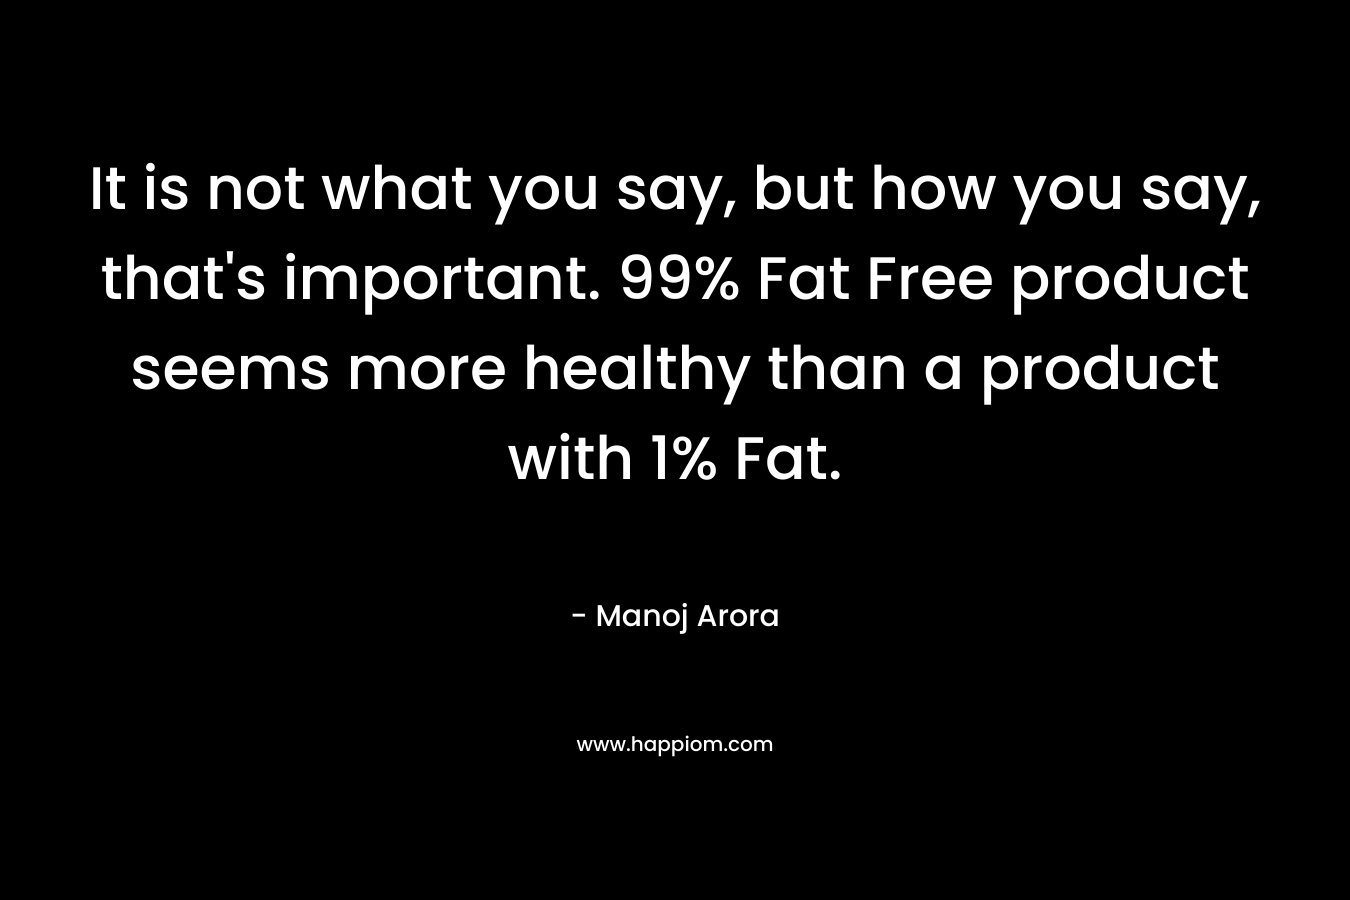 It is not what you say, but how you say, that’s important. 99% Fat Free product seems more healthy than a product with 1% Fat. – Manoj Arora